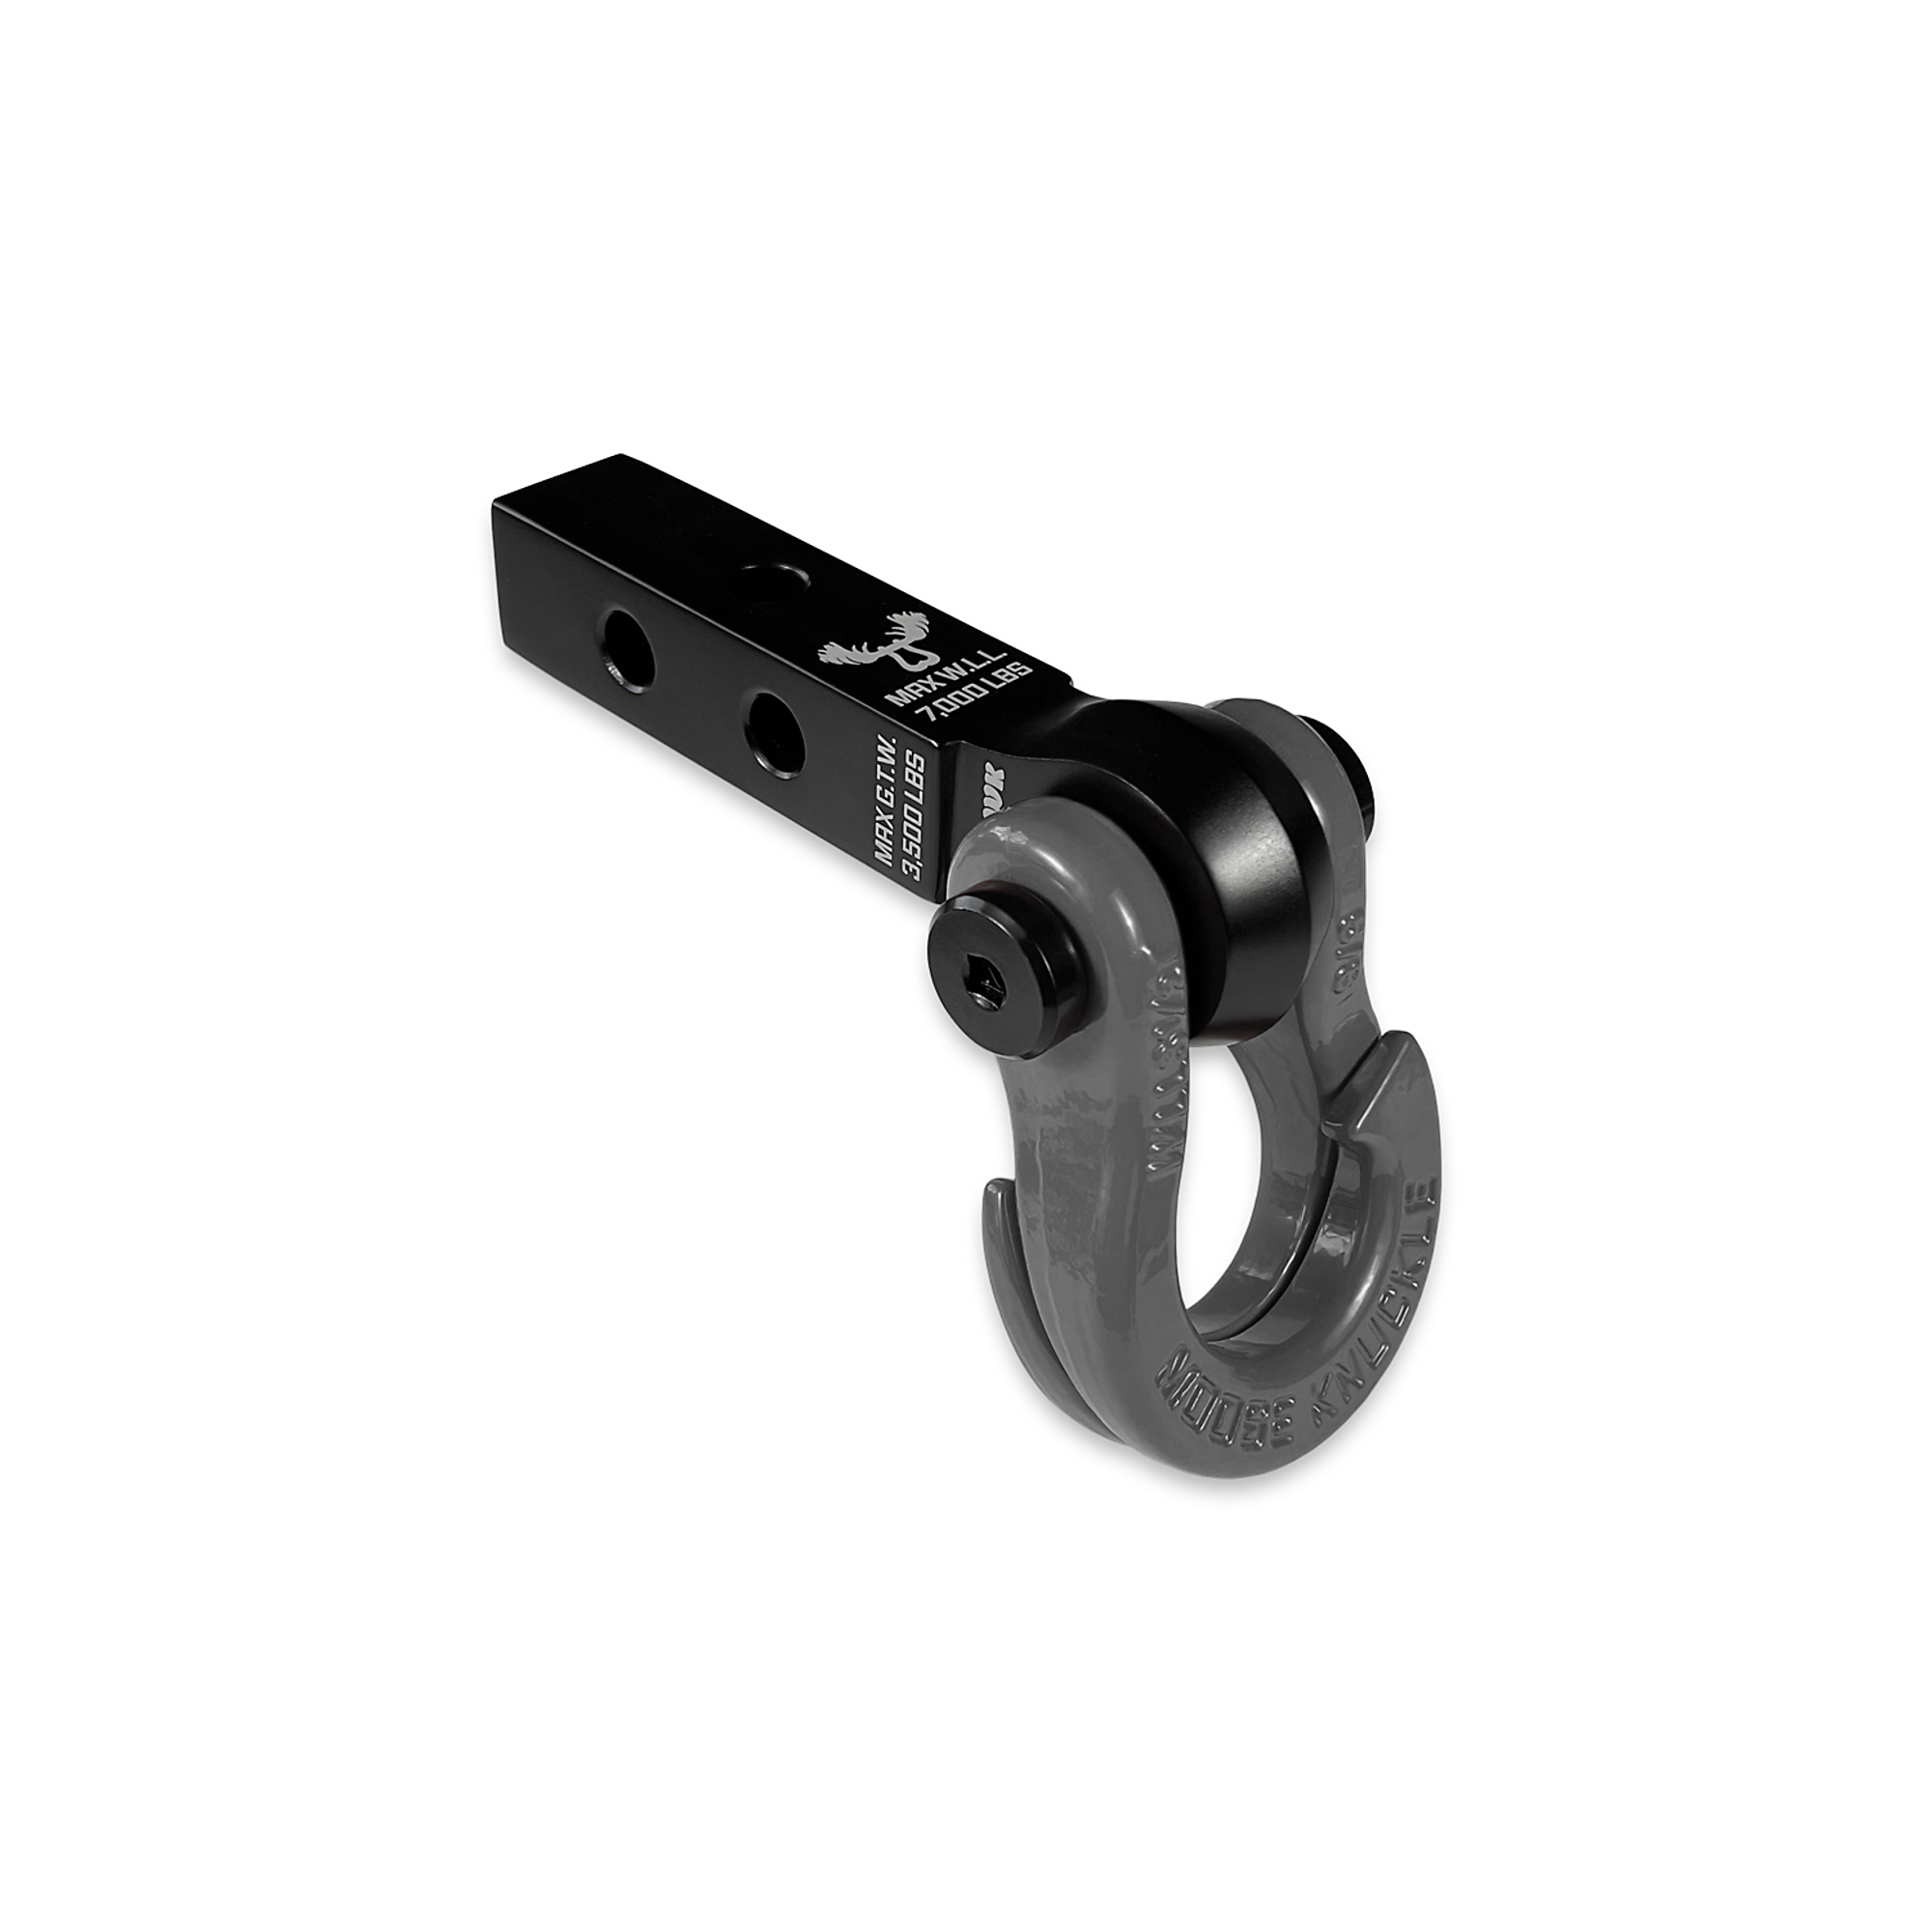 Moose Knuckle Offroad, 5/8 Jowl Split Shackle and Mohawk 1.25 Receiver Combo, Gross Towing Weight 3500 lb, Class Rating Class II, Model FN000042-010